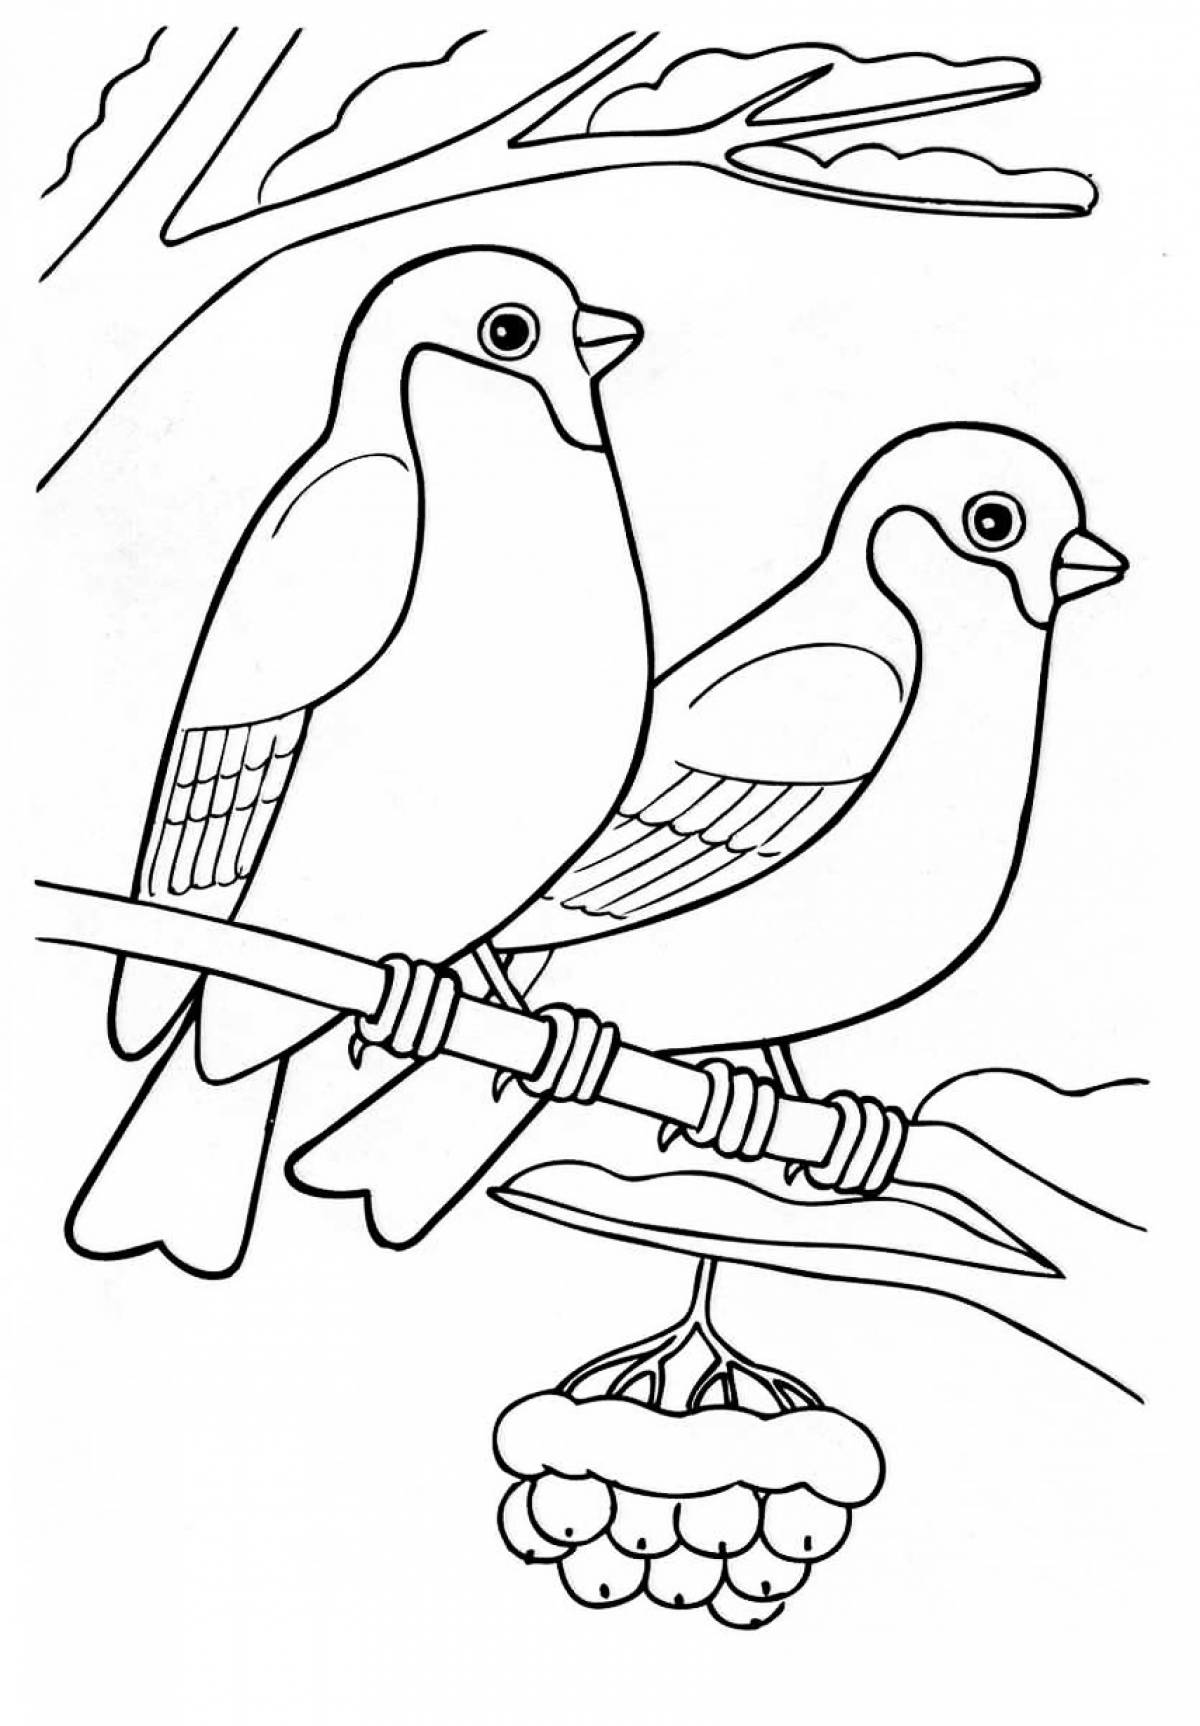 Two bullfinches